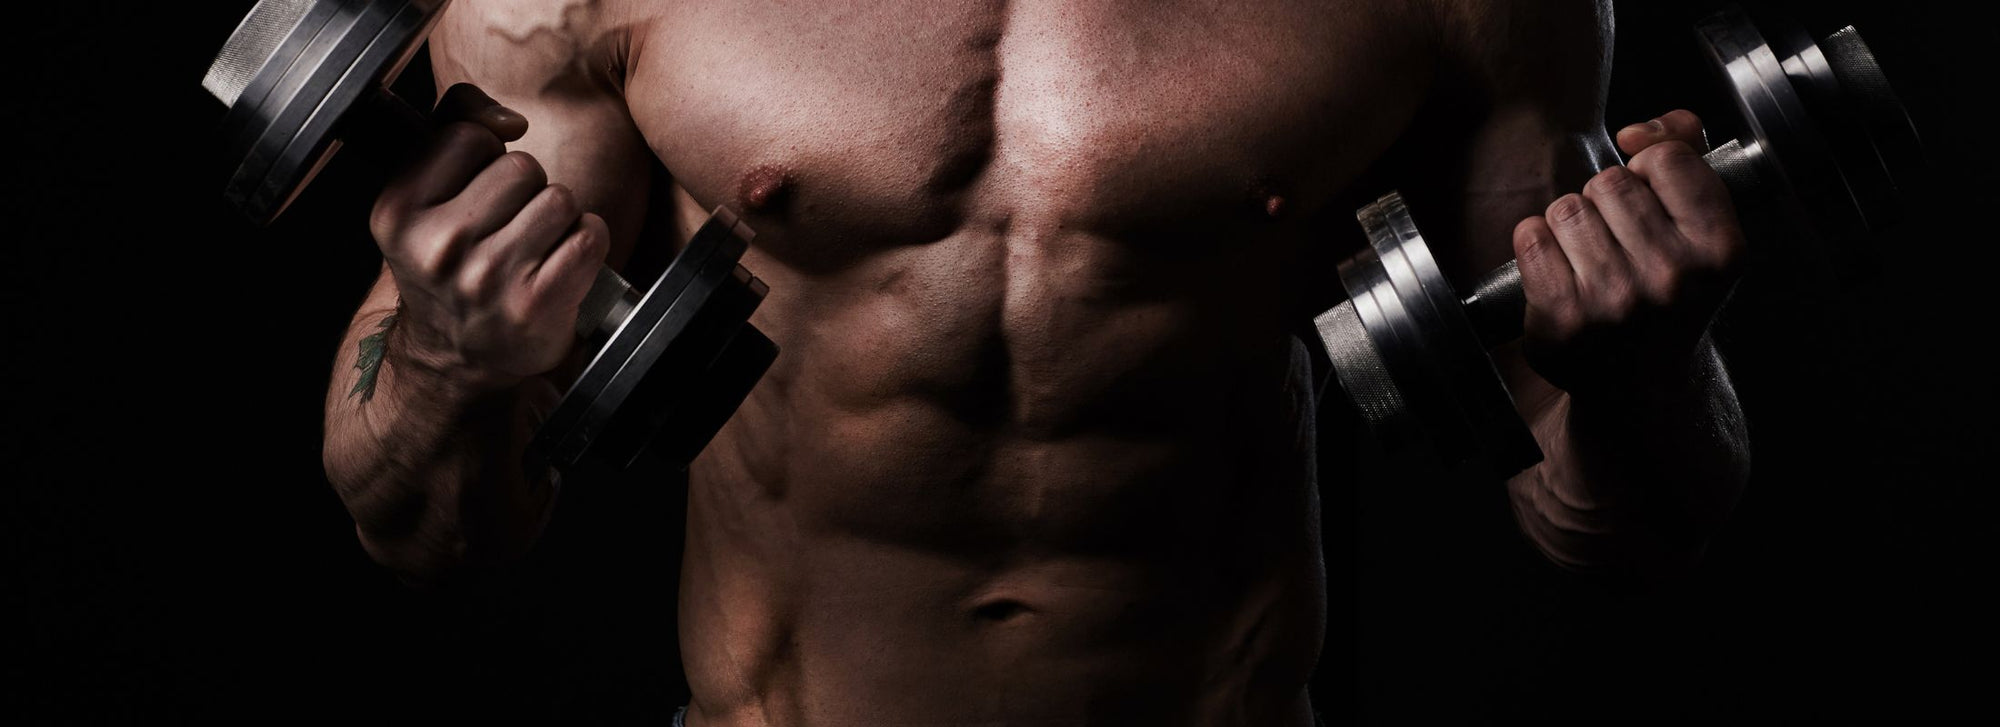 Achieving Shredded Abs: Nutrition And Exercise Tips